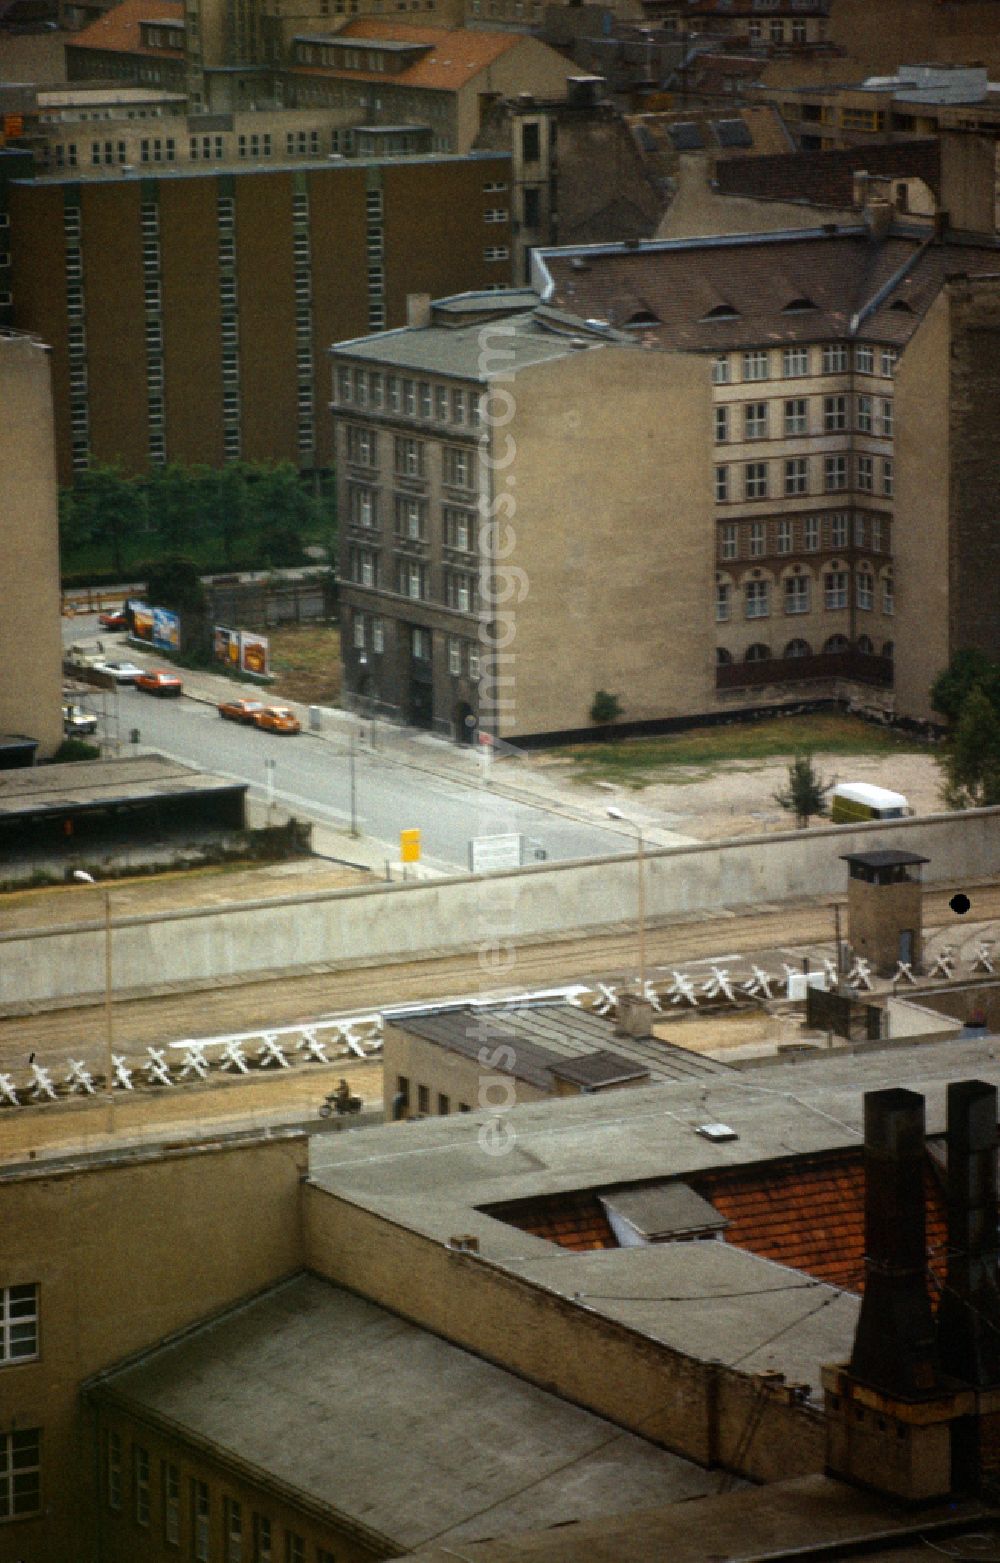 GDR picture archive: Berlin - View from a high-rise apartment building on Leipziger Strasse in East Berlin across the Wall strip towards Kreuzberg - West Berlin on the territory of the former GDR, German Democratic Republic